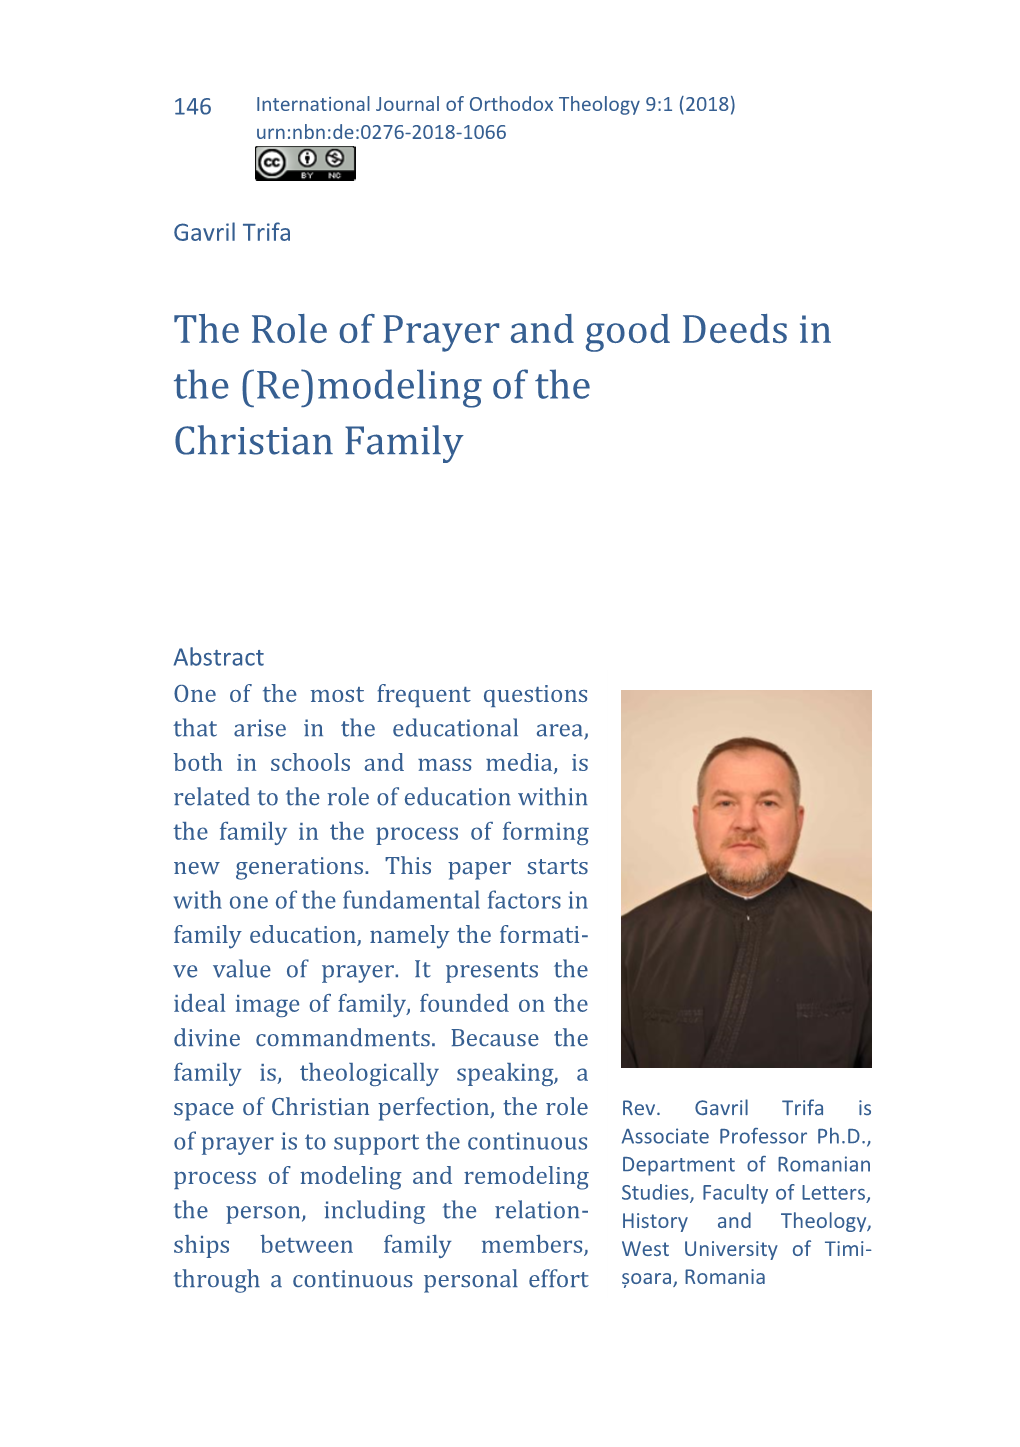 The Role of Prayer and Good Deeds in the (Re)Modeling of the Christian Family